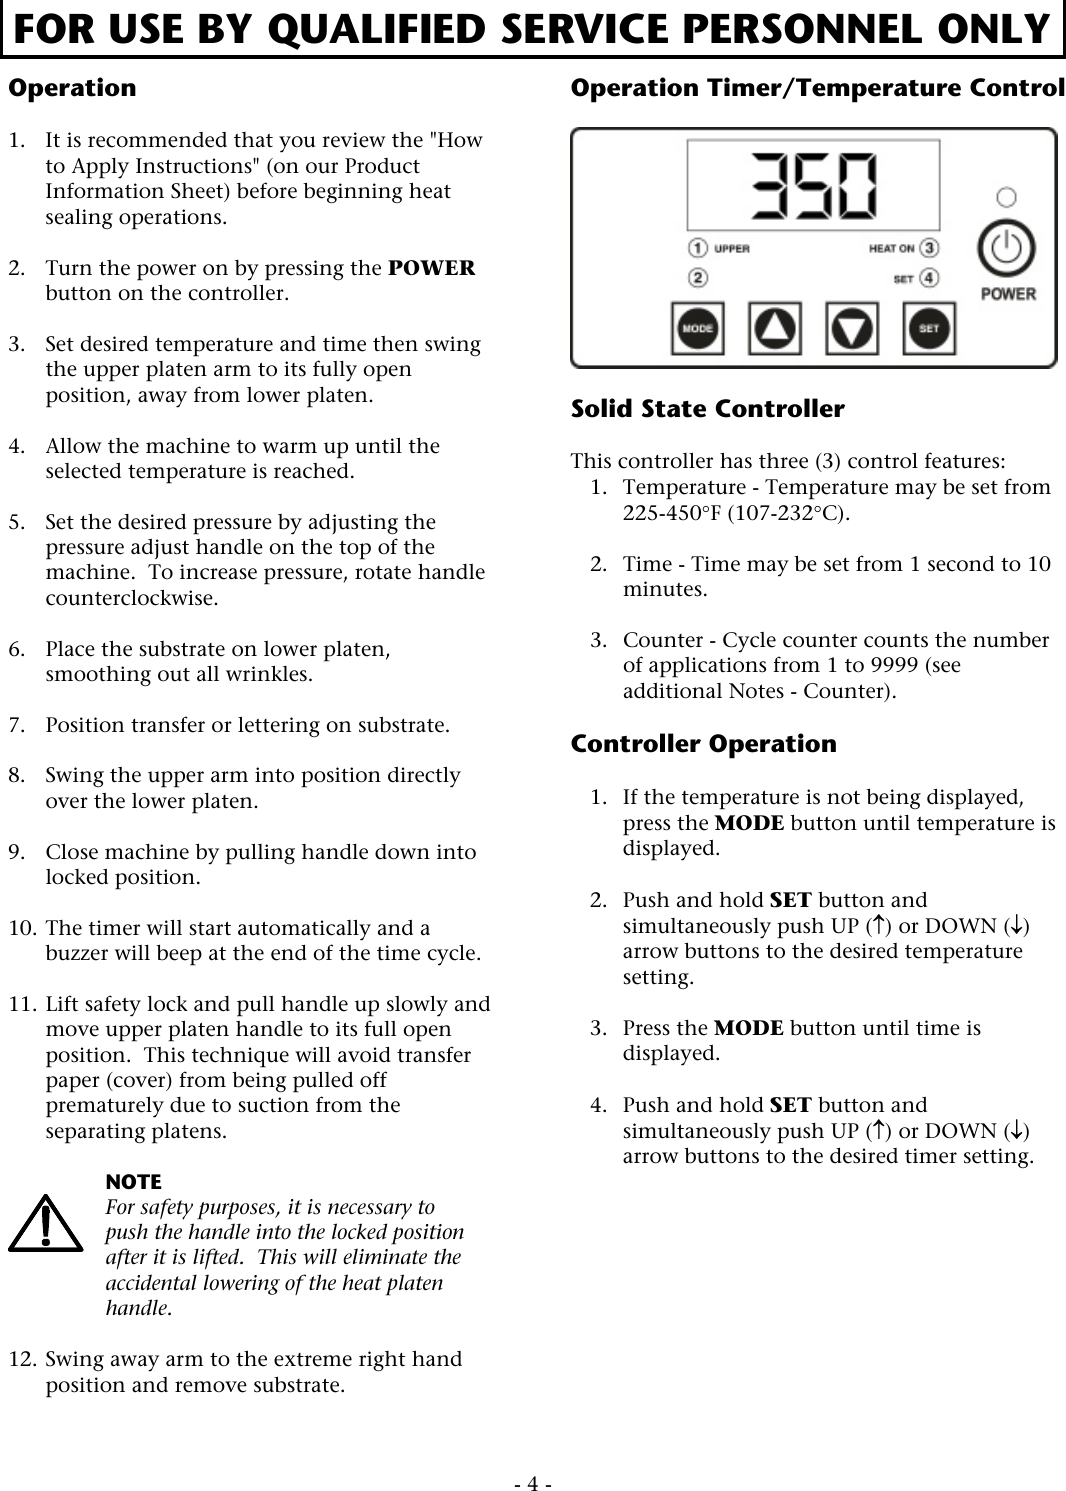 Page 4 of 12 - ACE&EASTMAN Instagraphic 204 Parts & Instructions - 204A Manual English 040819 User